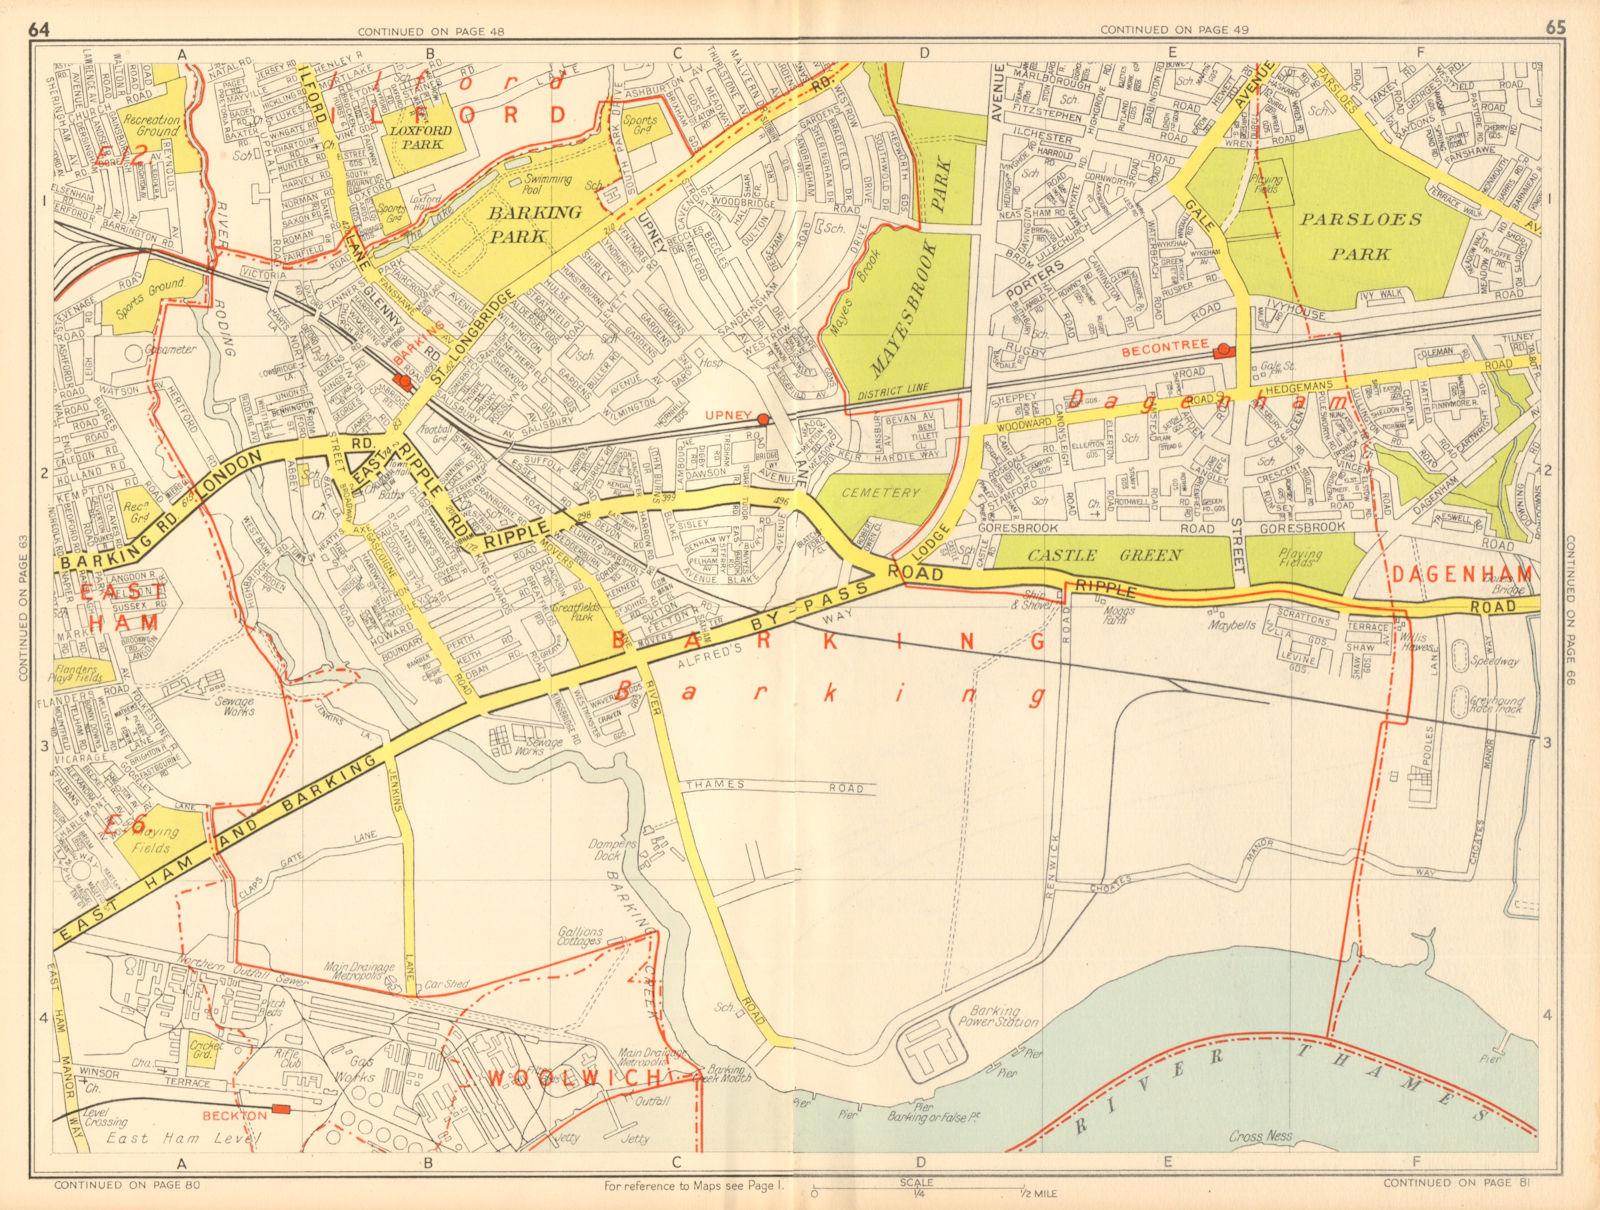 BARKING DAGENHAM Becontree Upney Ilford. GEOGRAPHERS' A-Z 1948 old vintage map